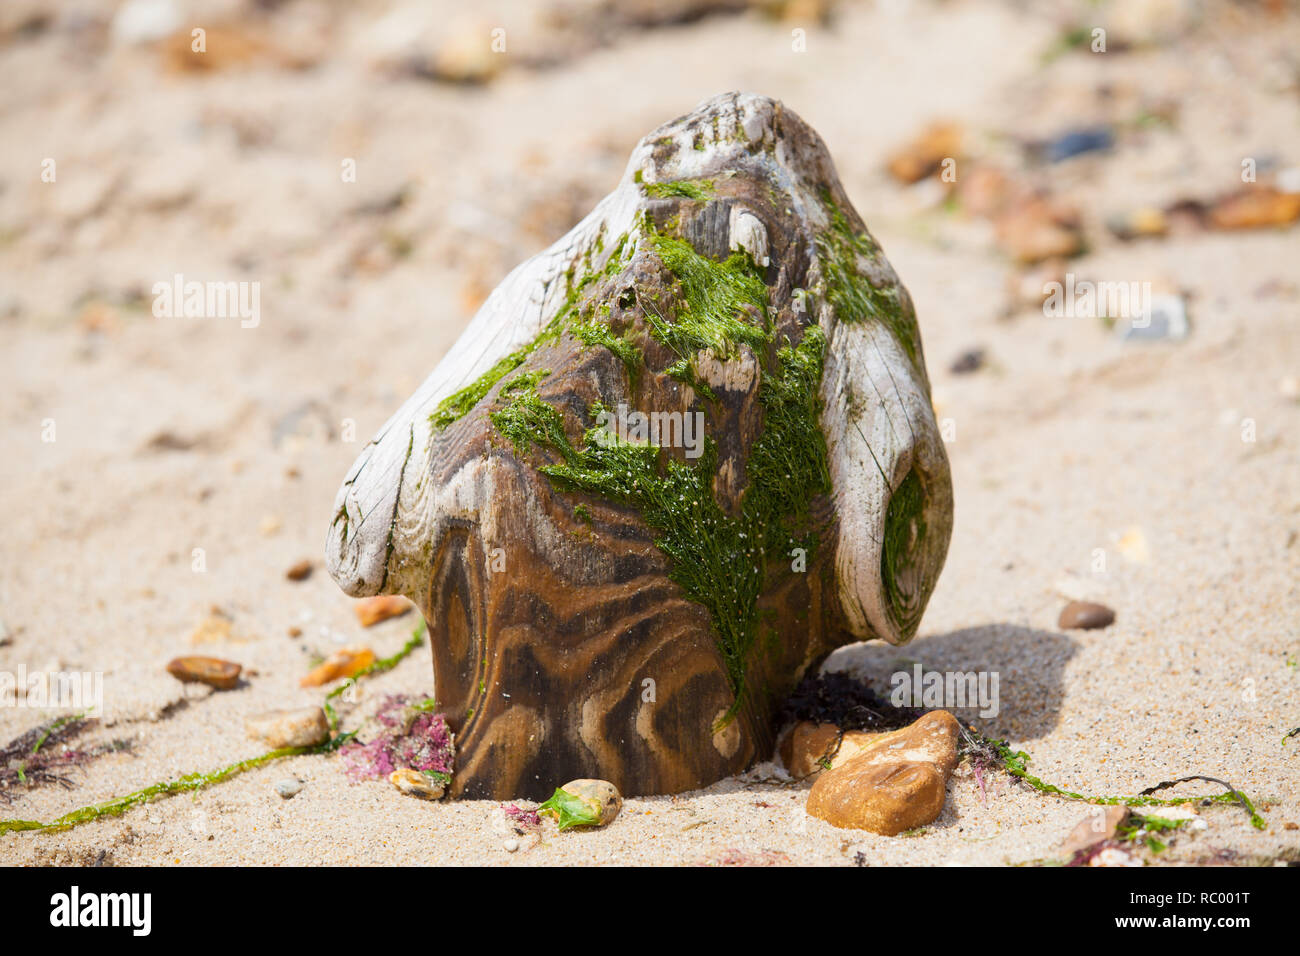 Lump of weathered wood on sandy beach, covered in moss. Stock Photo